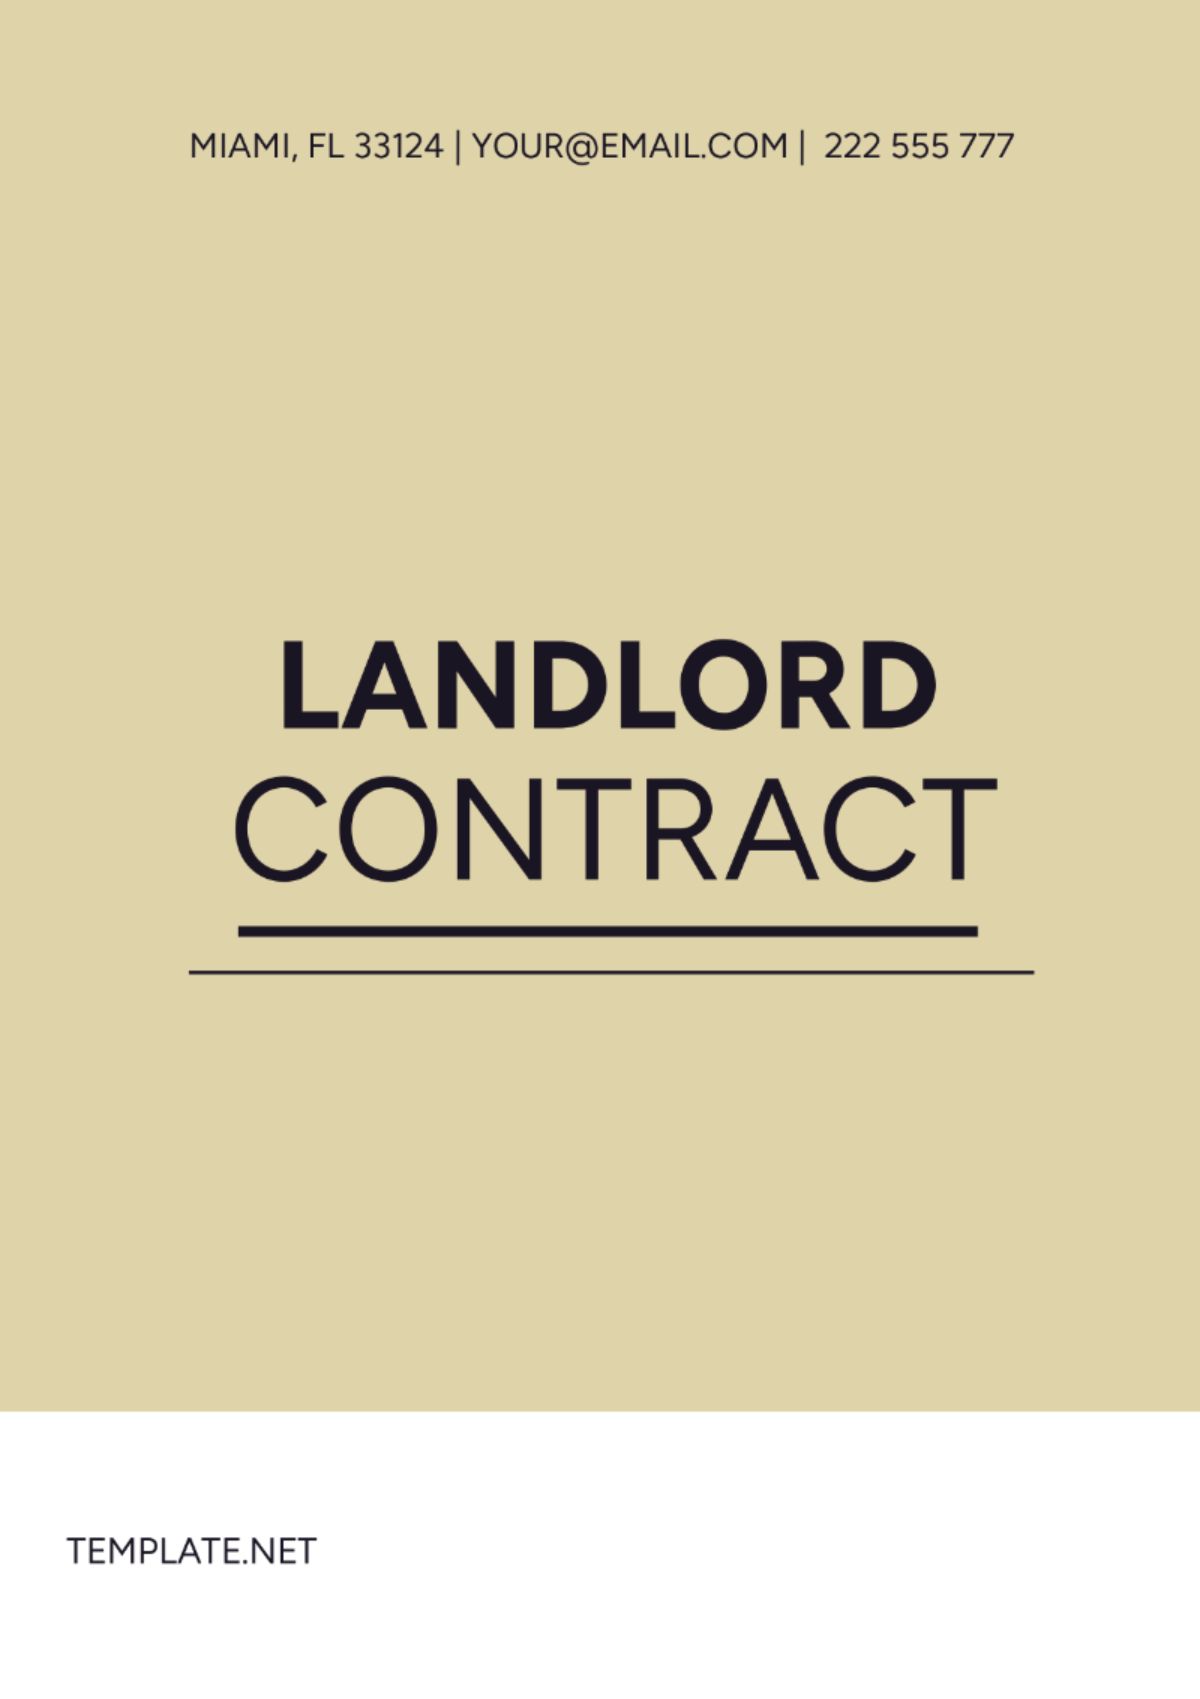 Landlord Contract Template